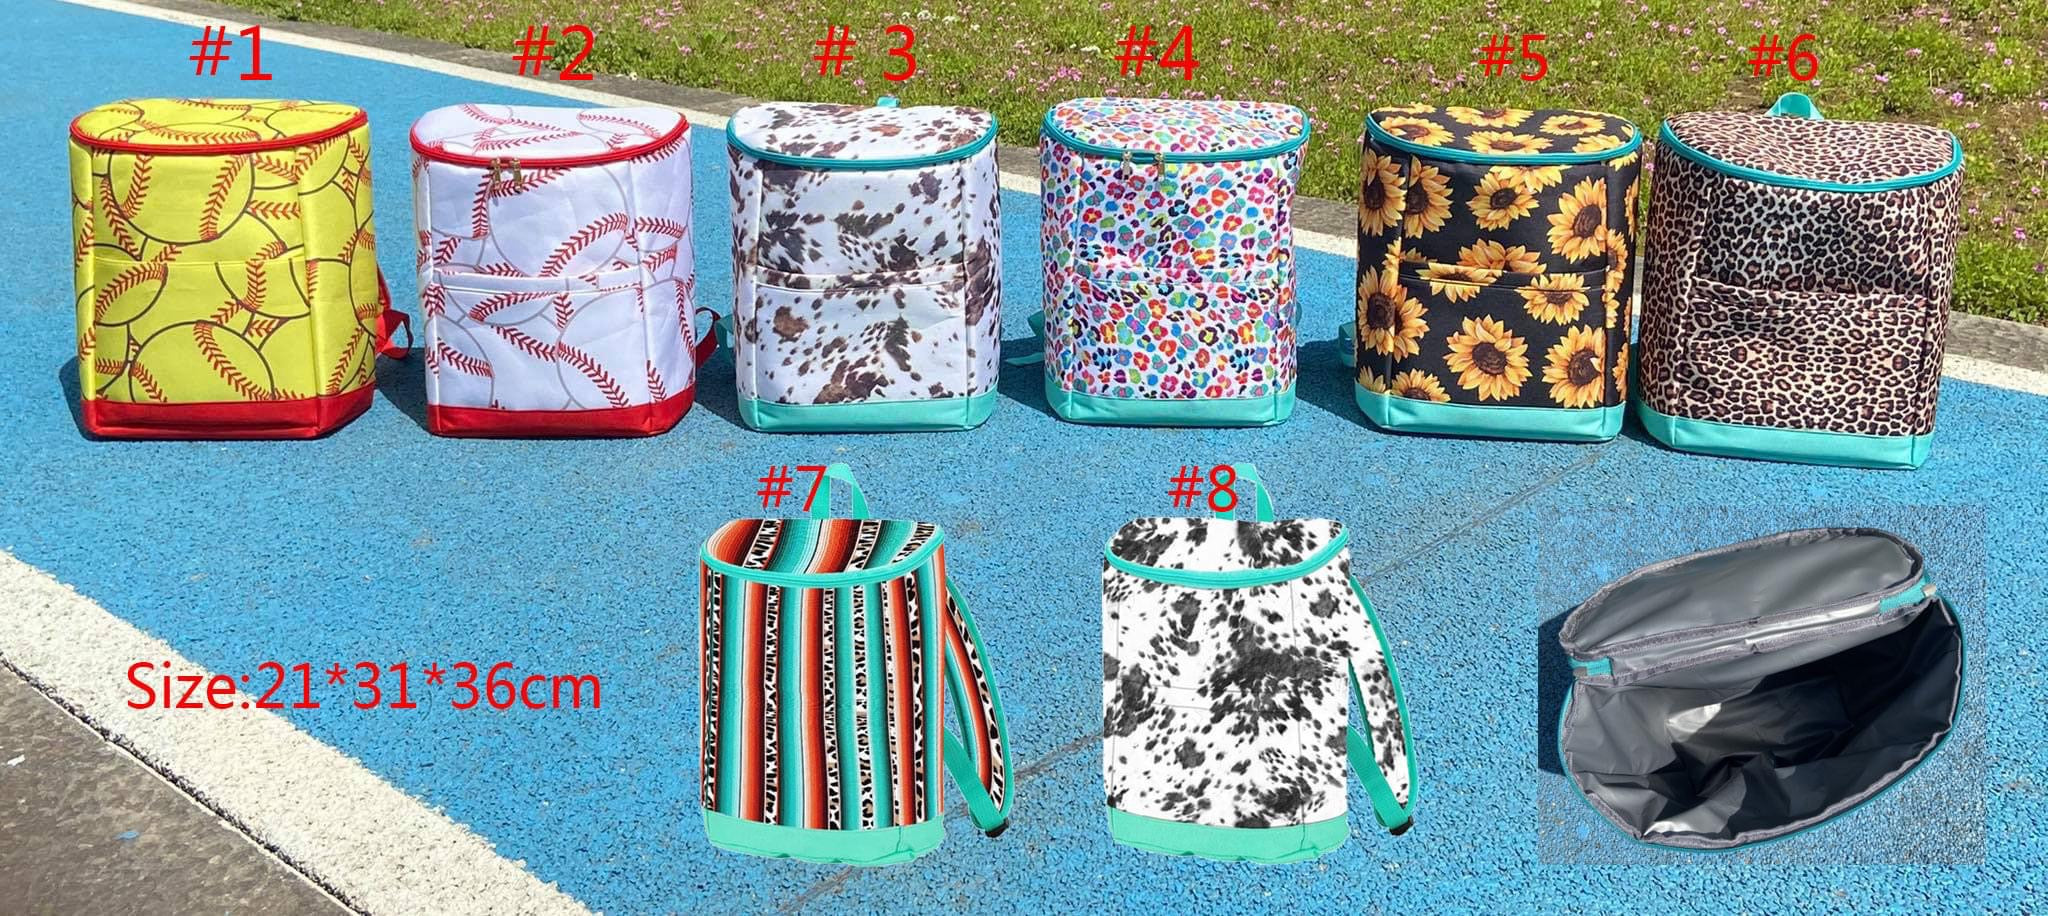 RTS Insulated Colorful Backpack Tote Cooler